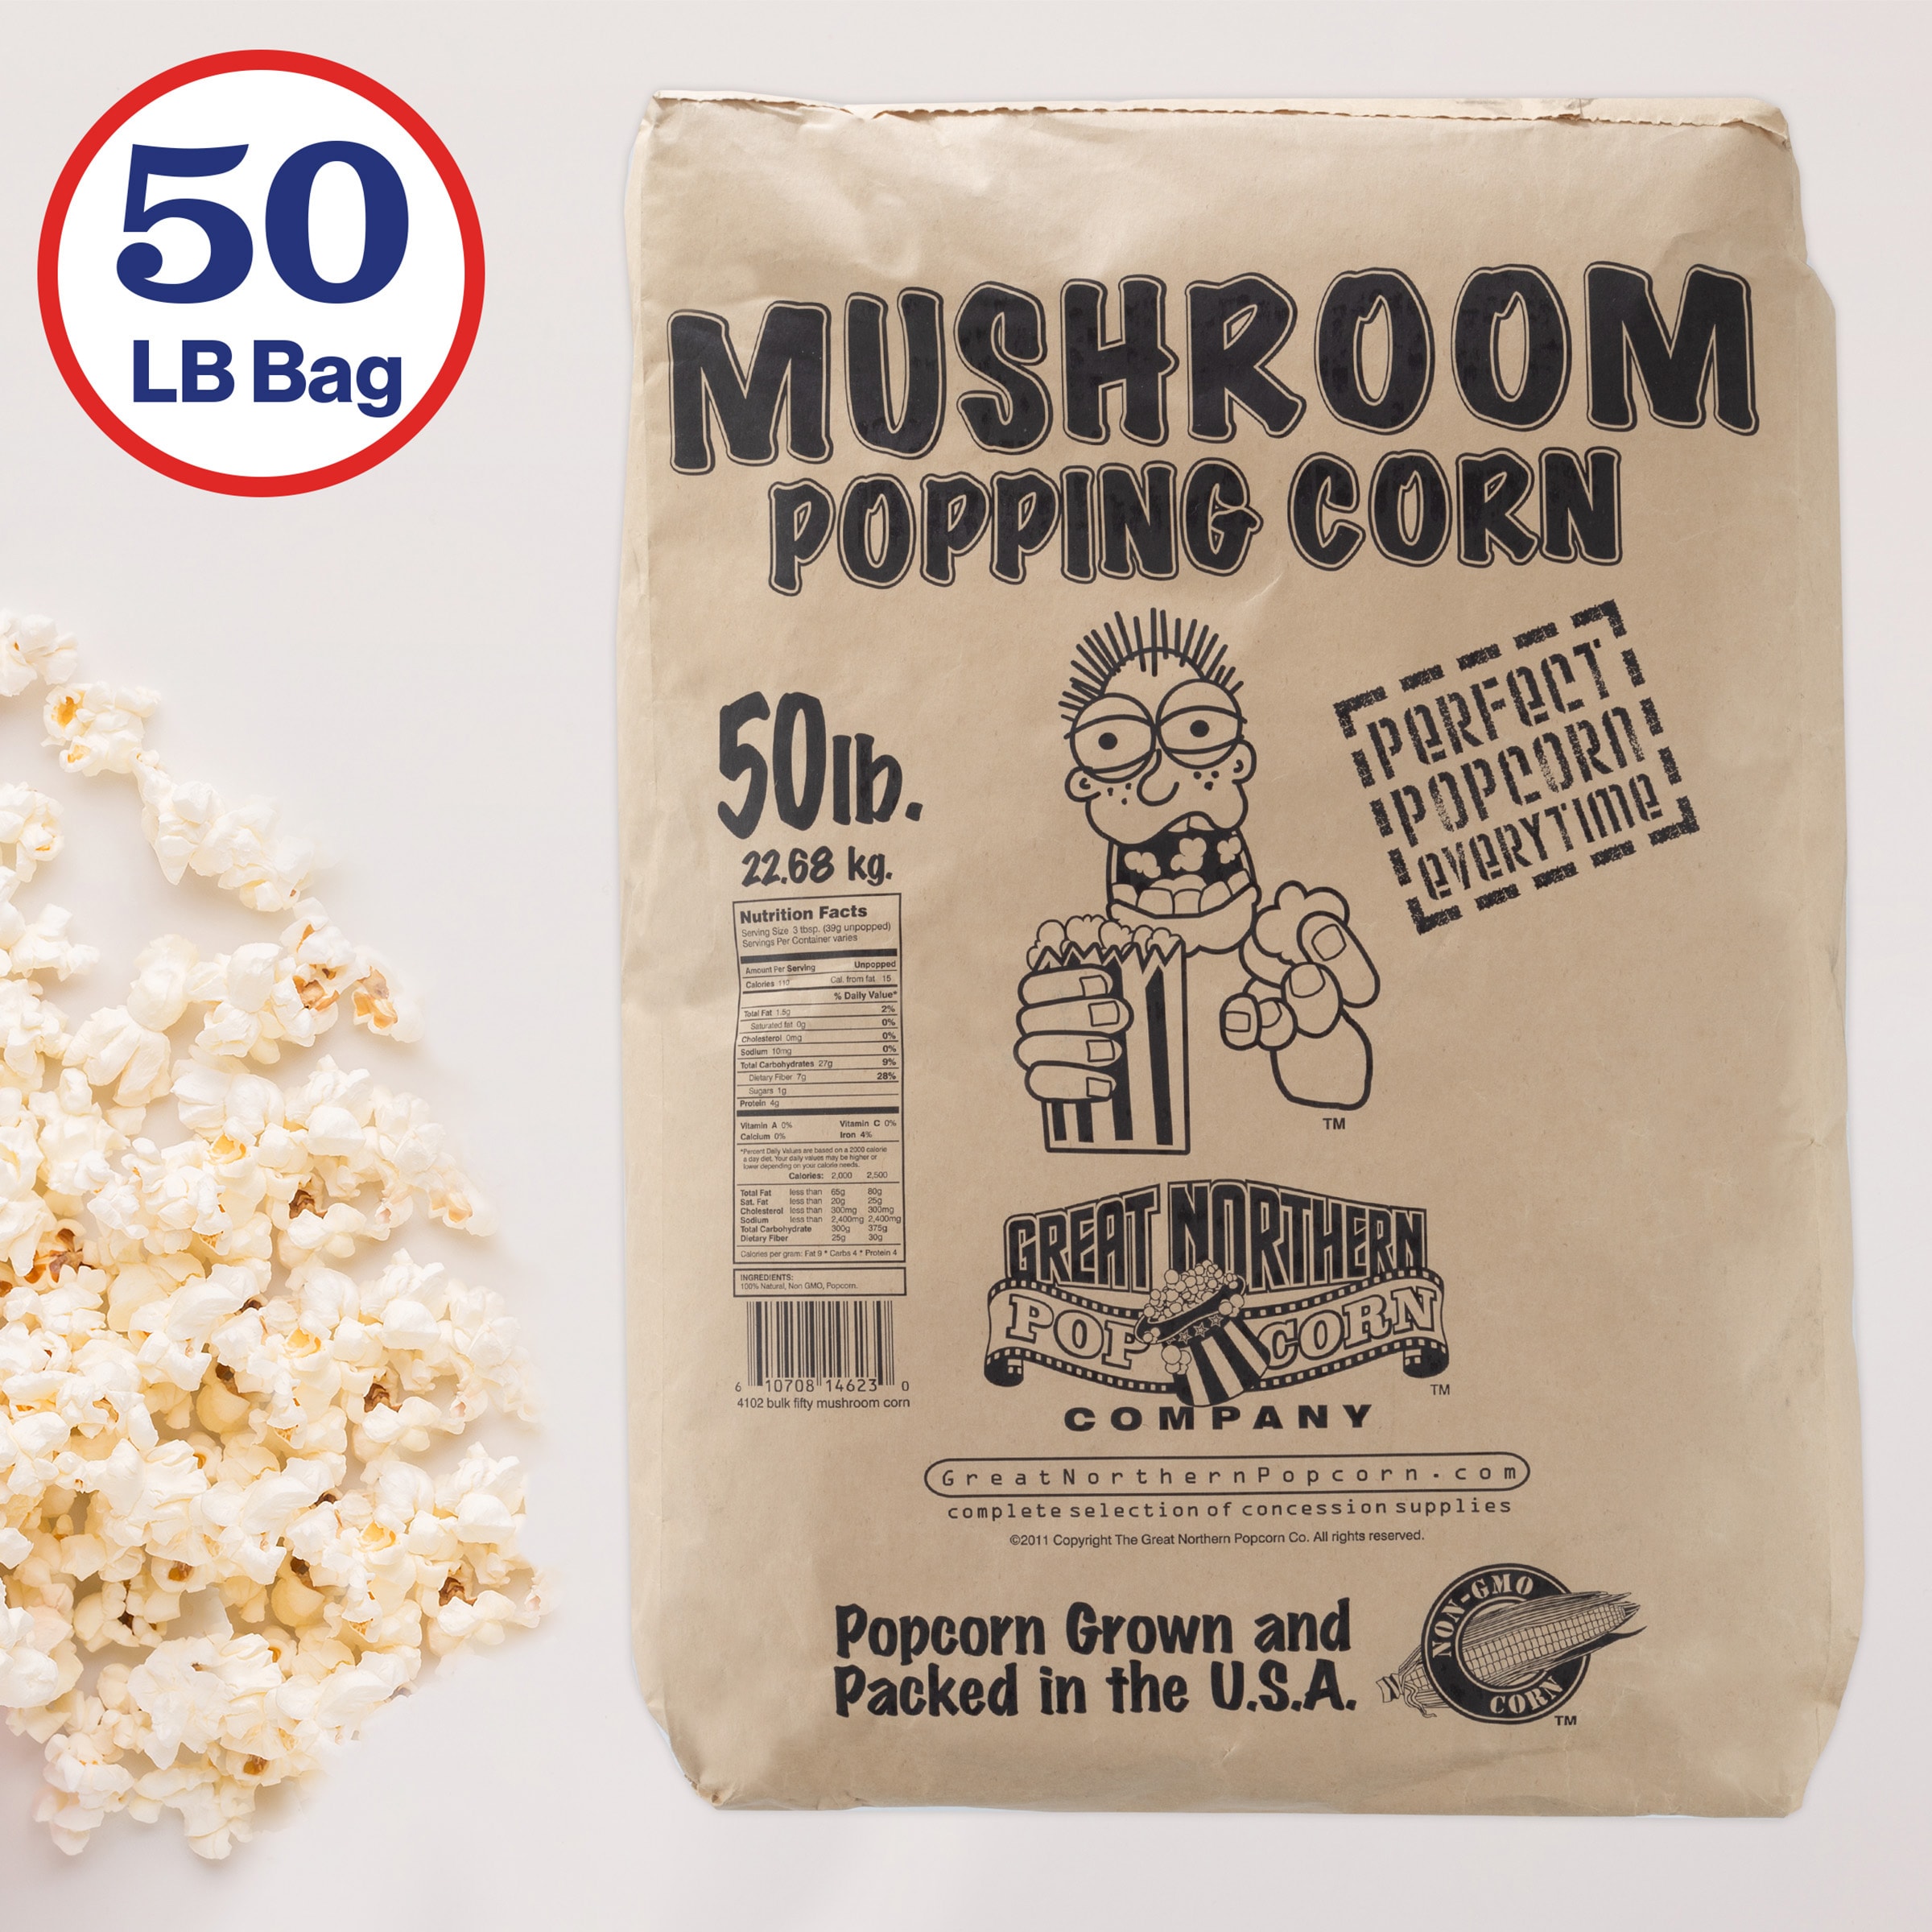 Whirley Pop With Popcorn Kits Case - Valley Popcorn Services